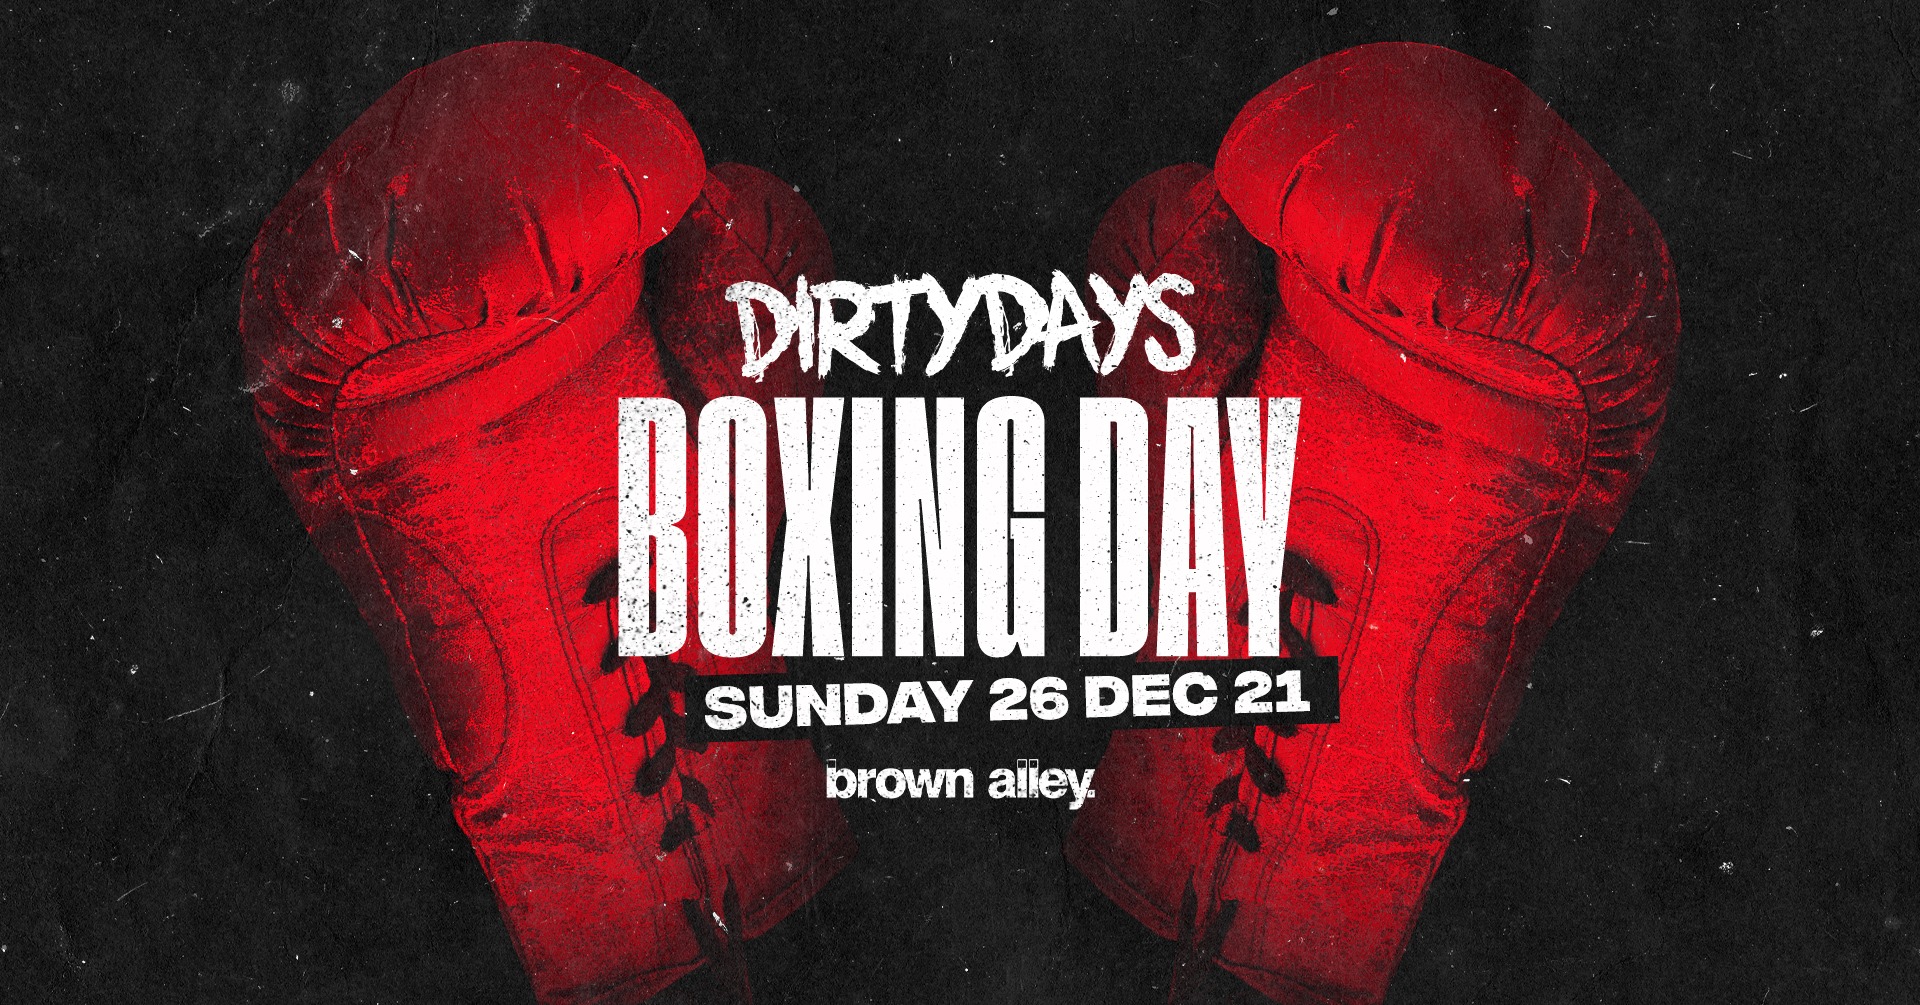 DIRTY DAYS - BOXING DAY 